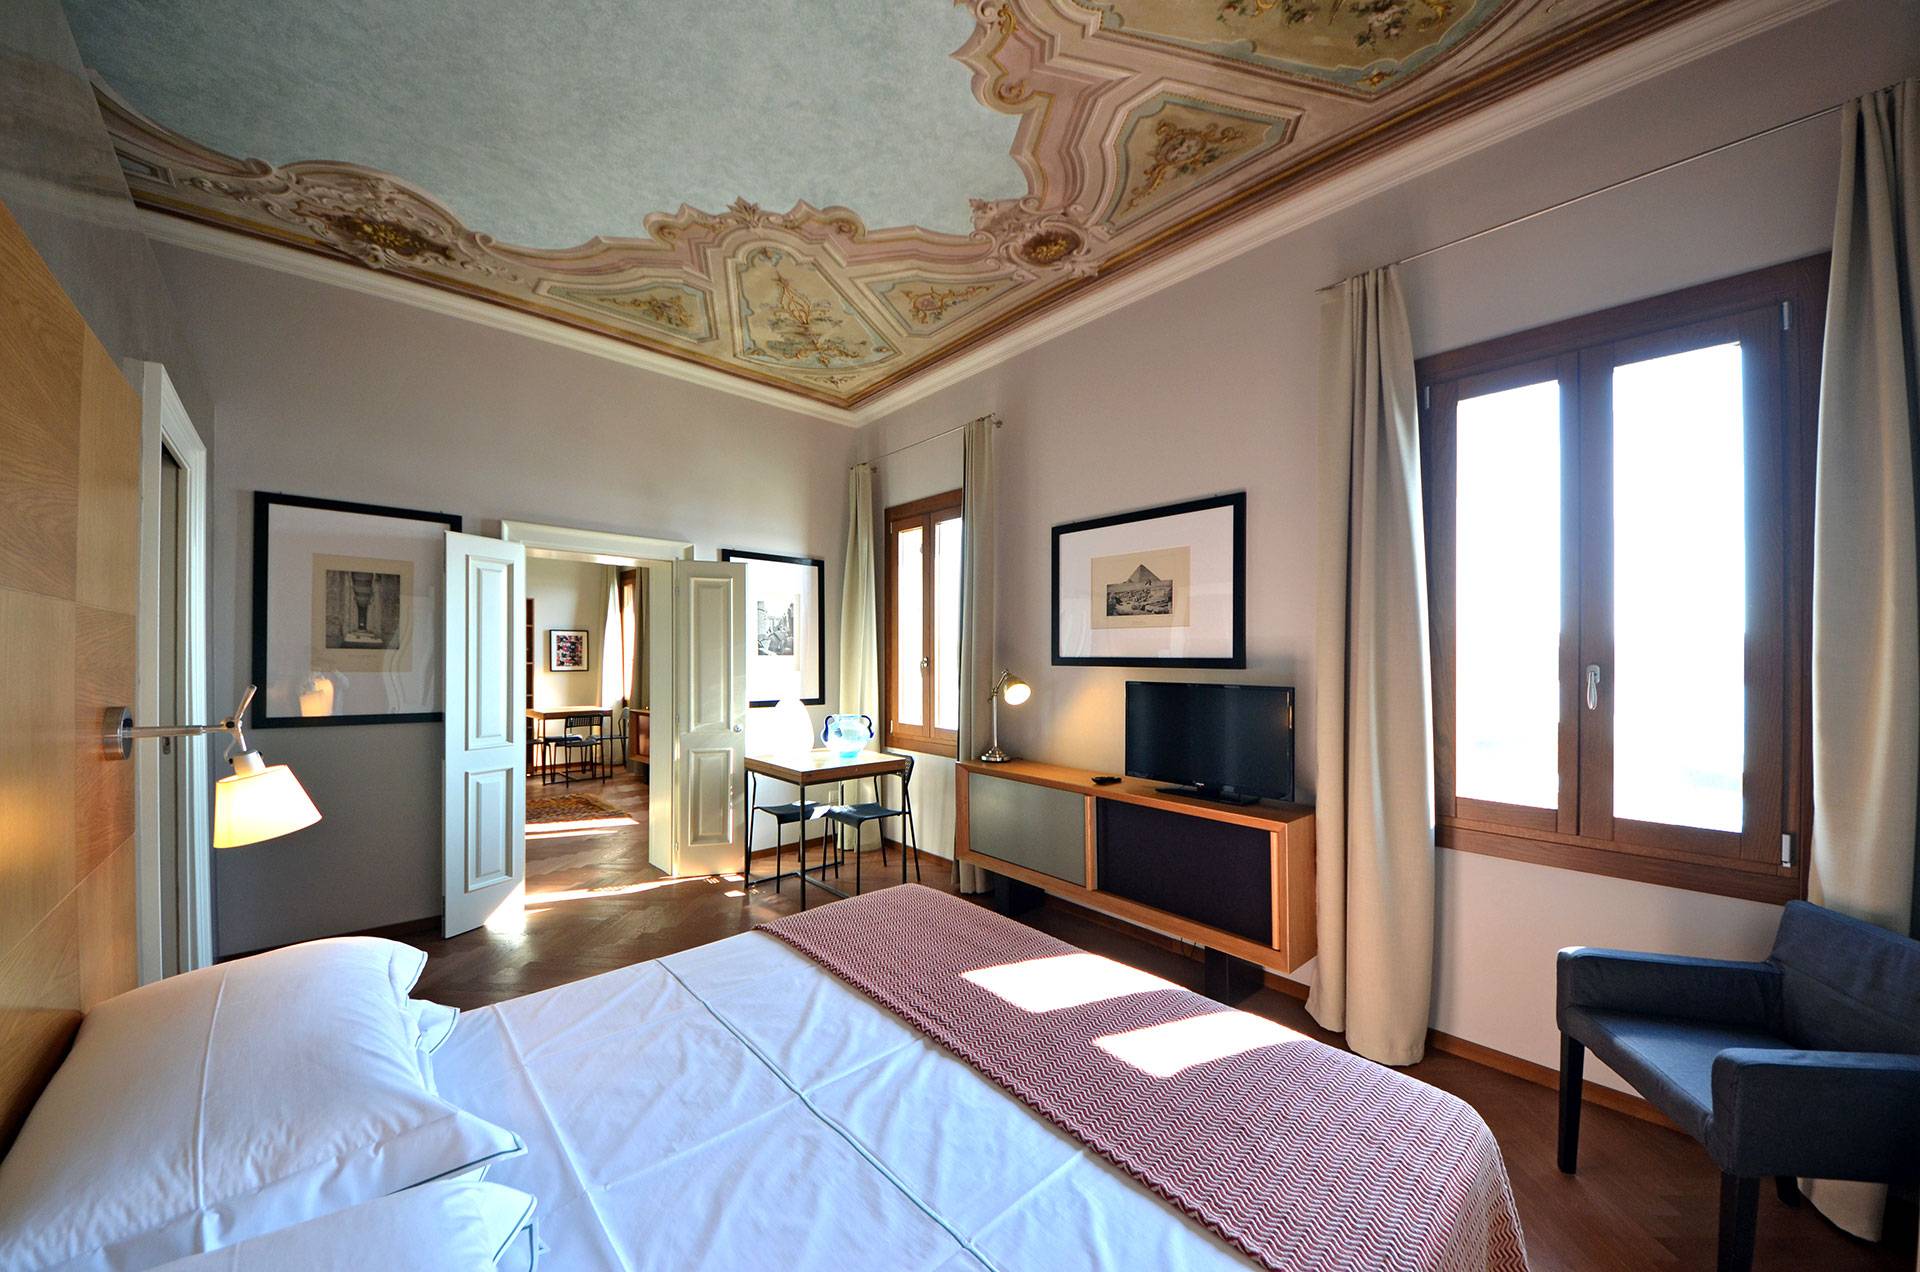 master bedroom with frescoed ceiling, en-suite bathroom and canal view